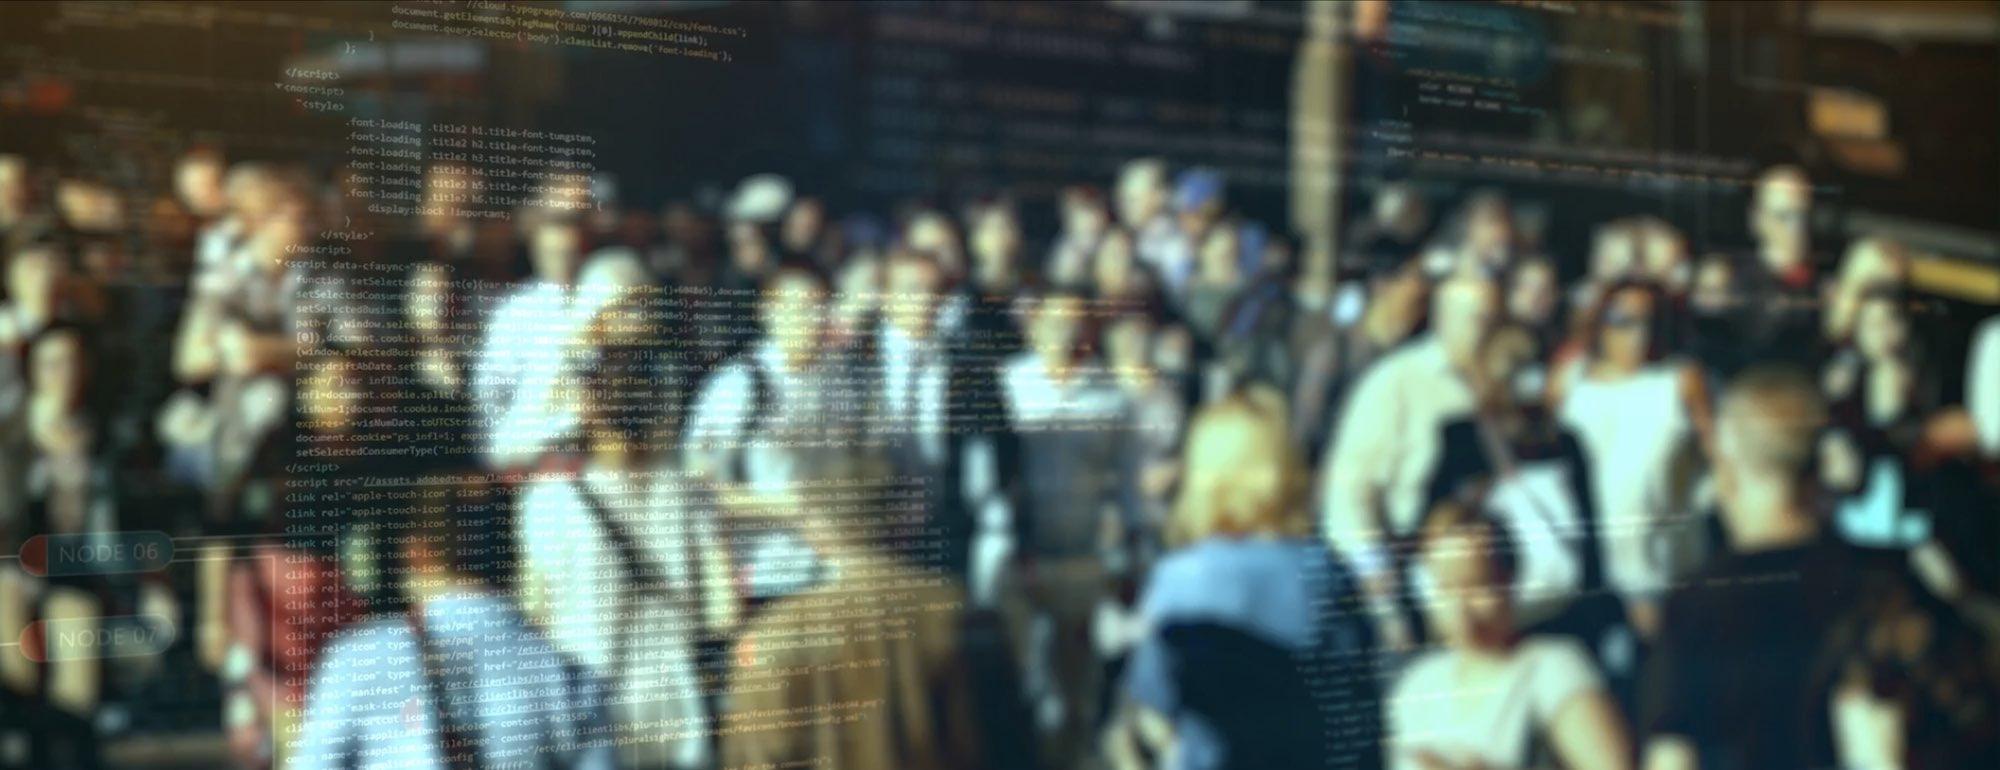 video surveillance of a crowd of people